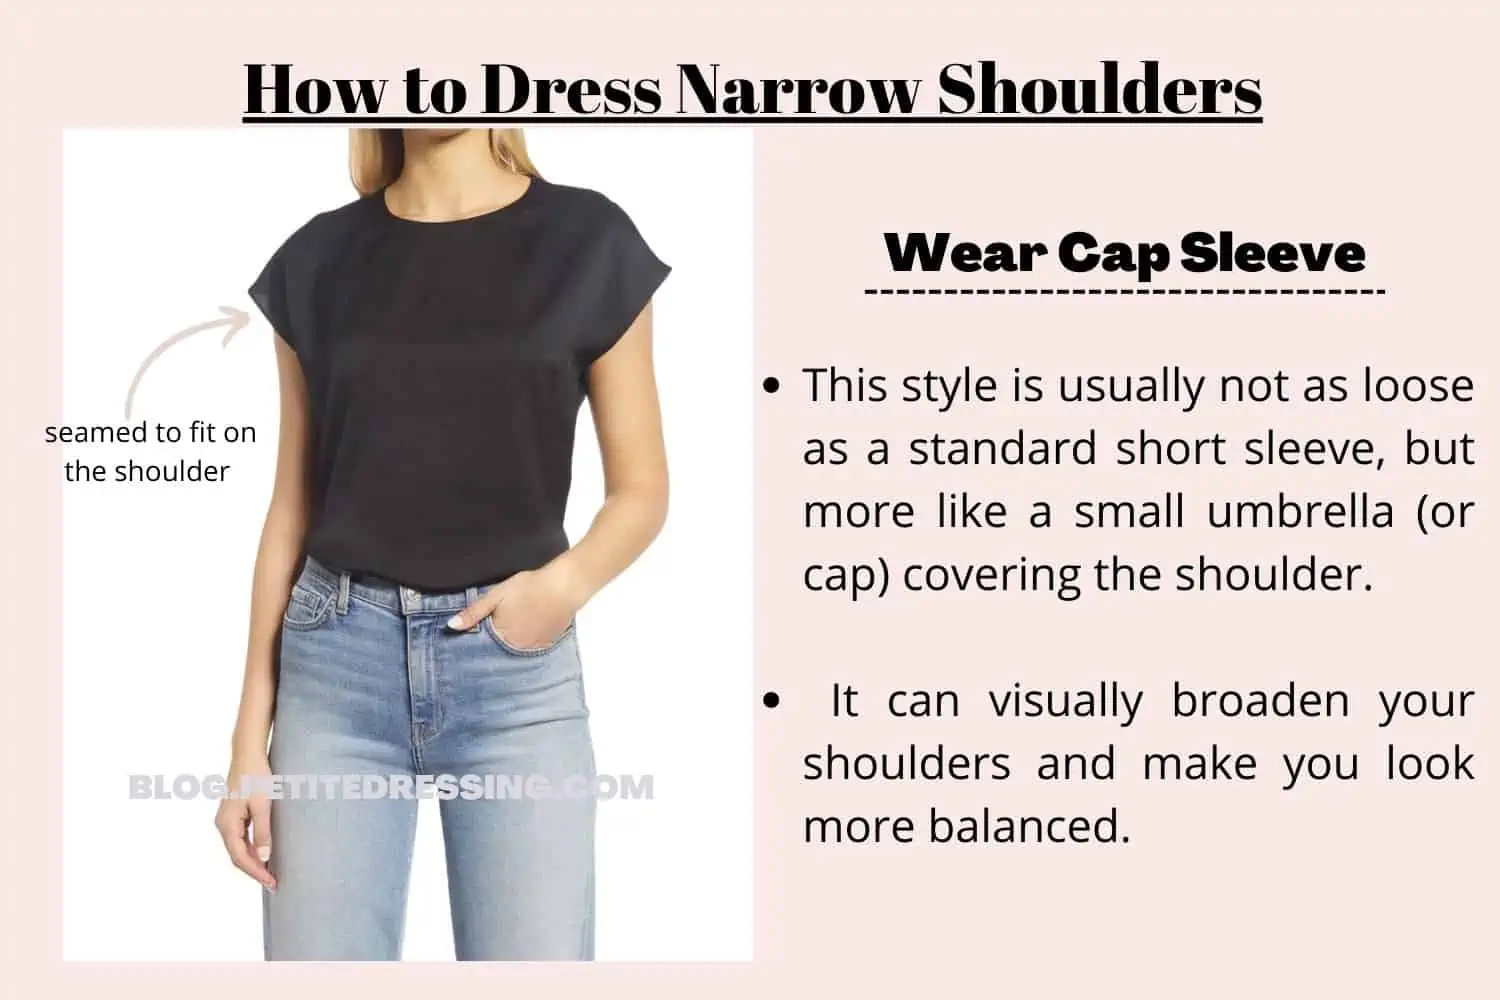 Narrow Shoulders? What's To Do To Make Them Look More Defined?